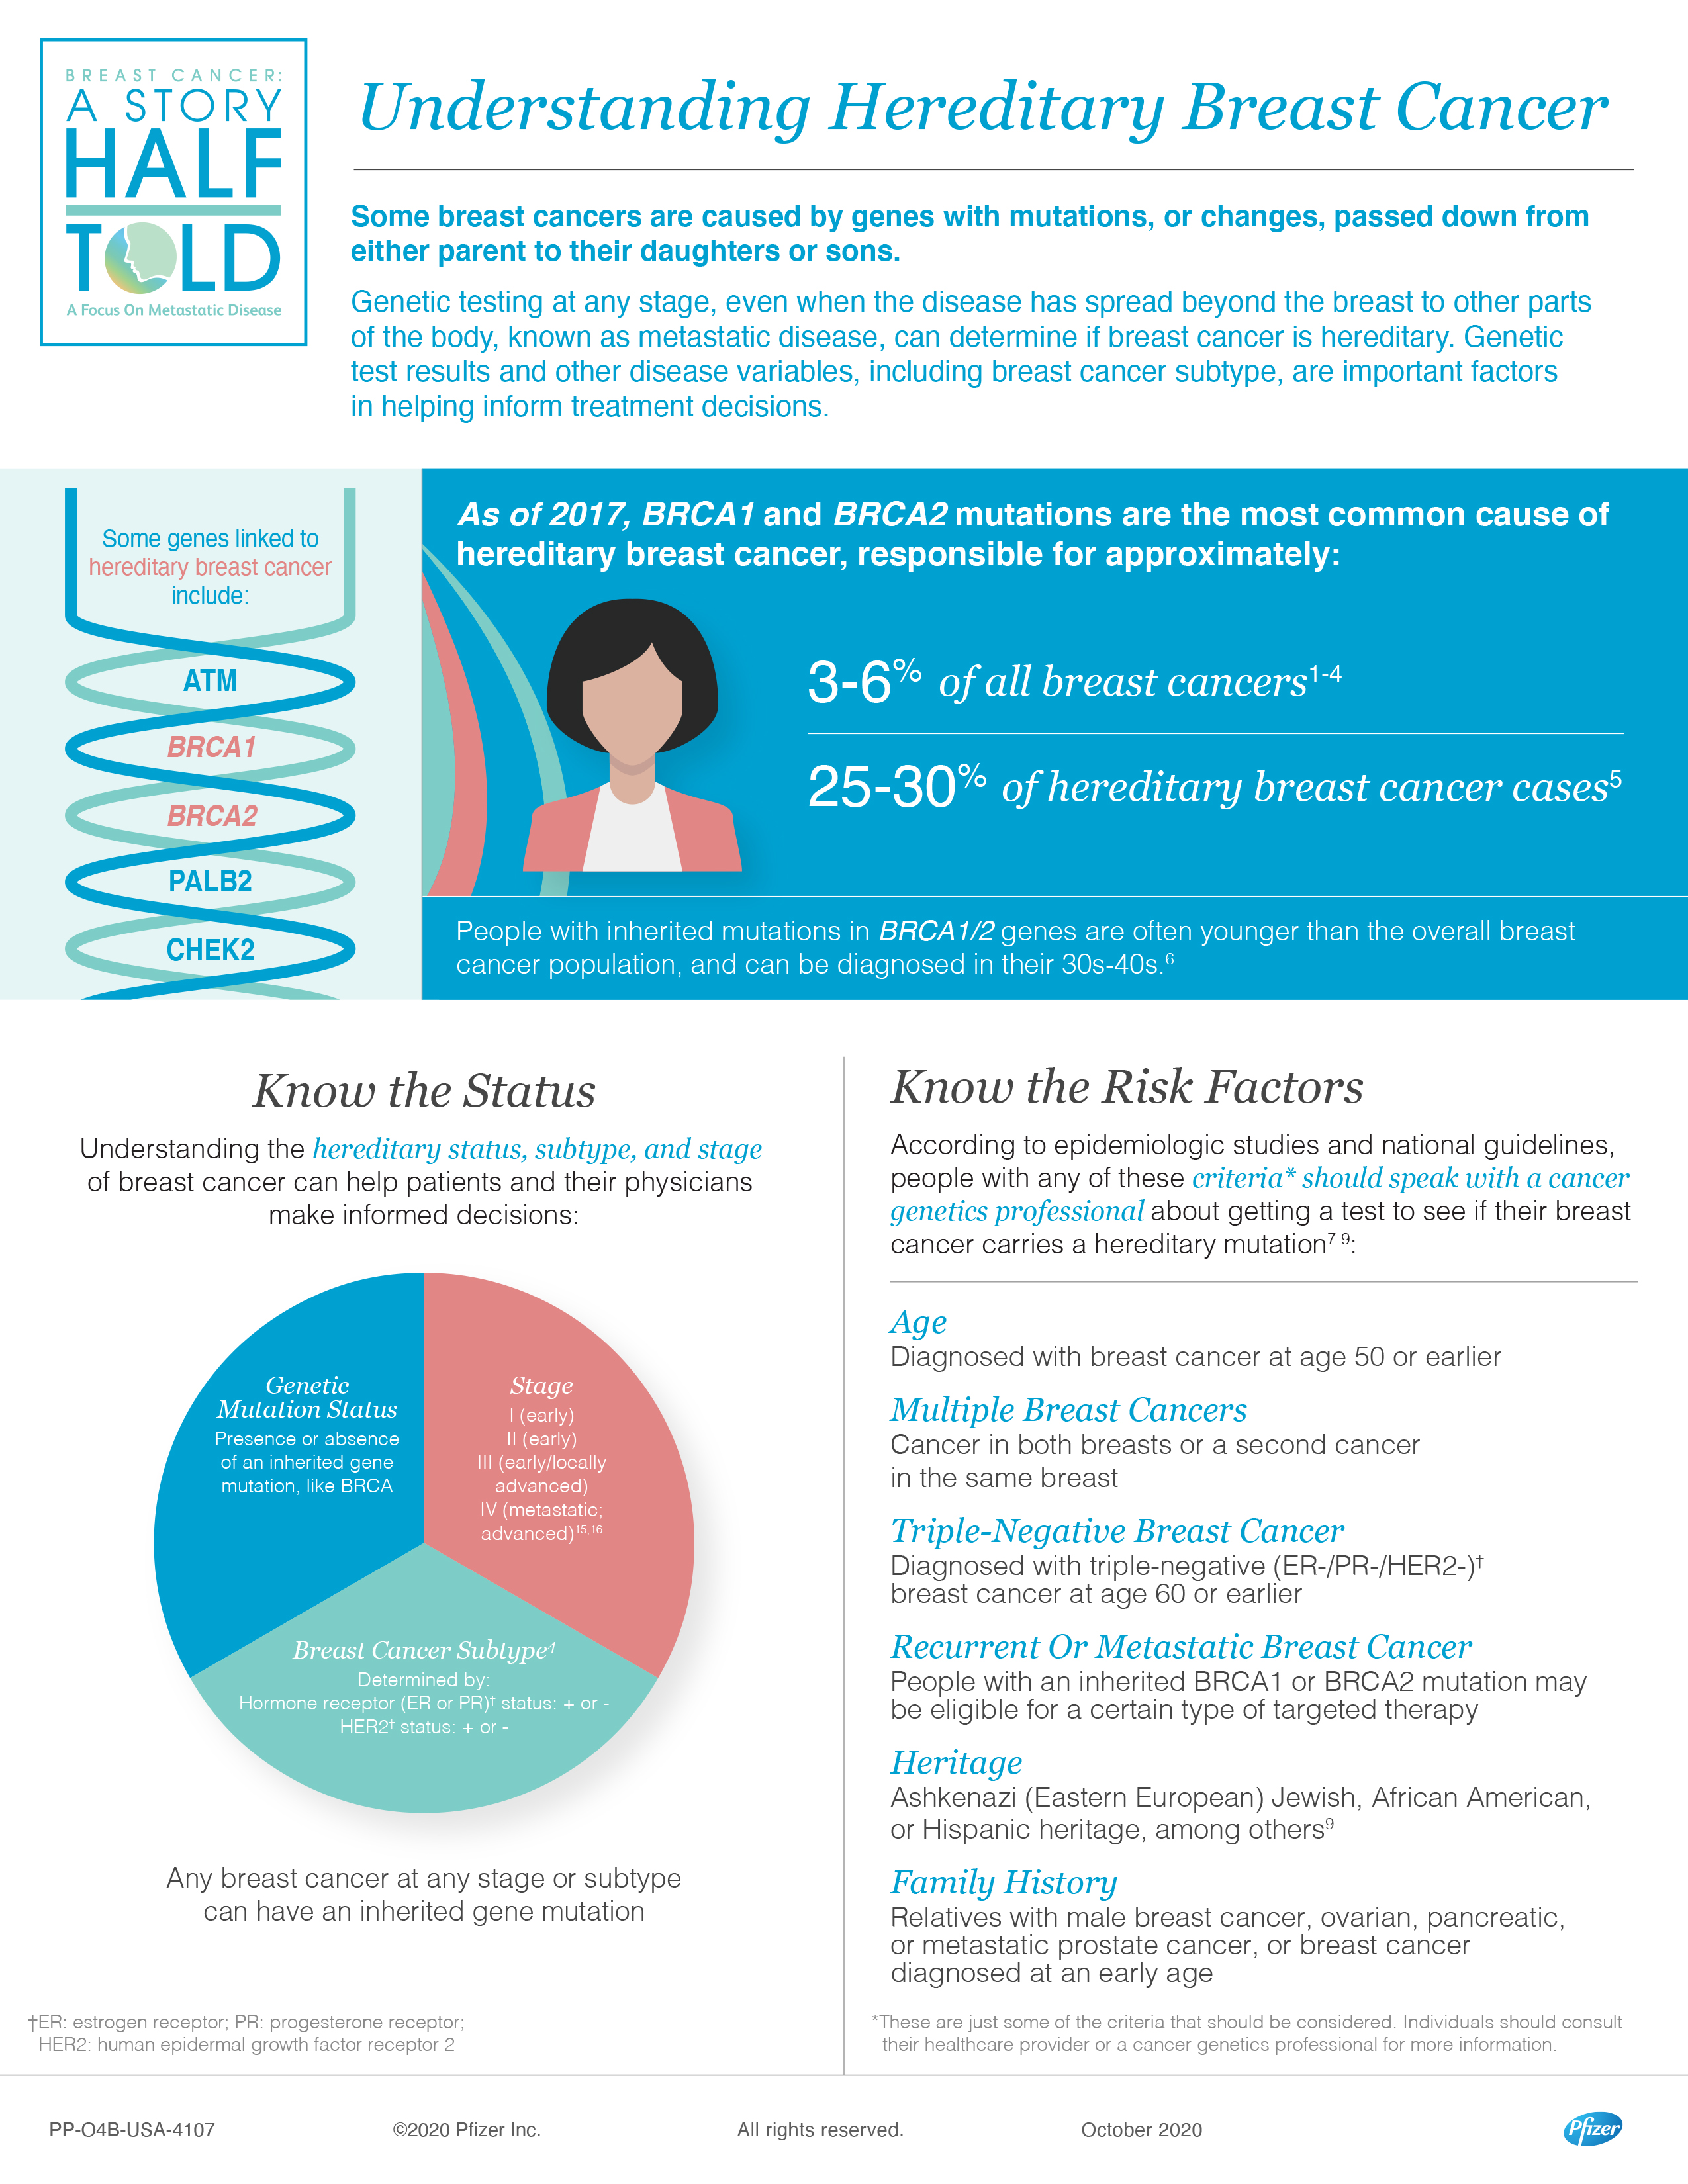 4 SHT Hereditary Breast Cancer Infographic